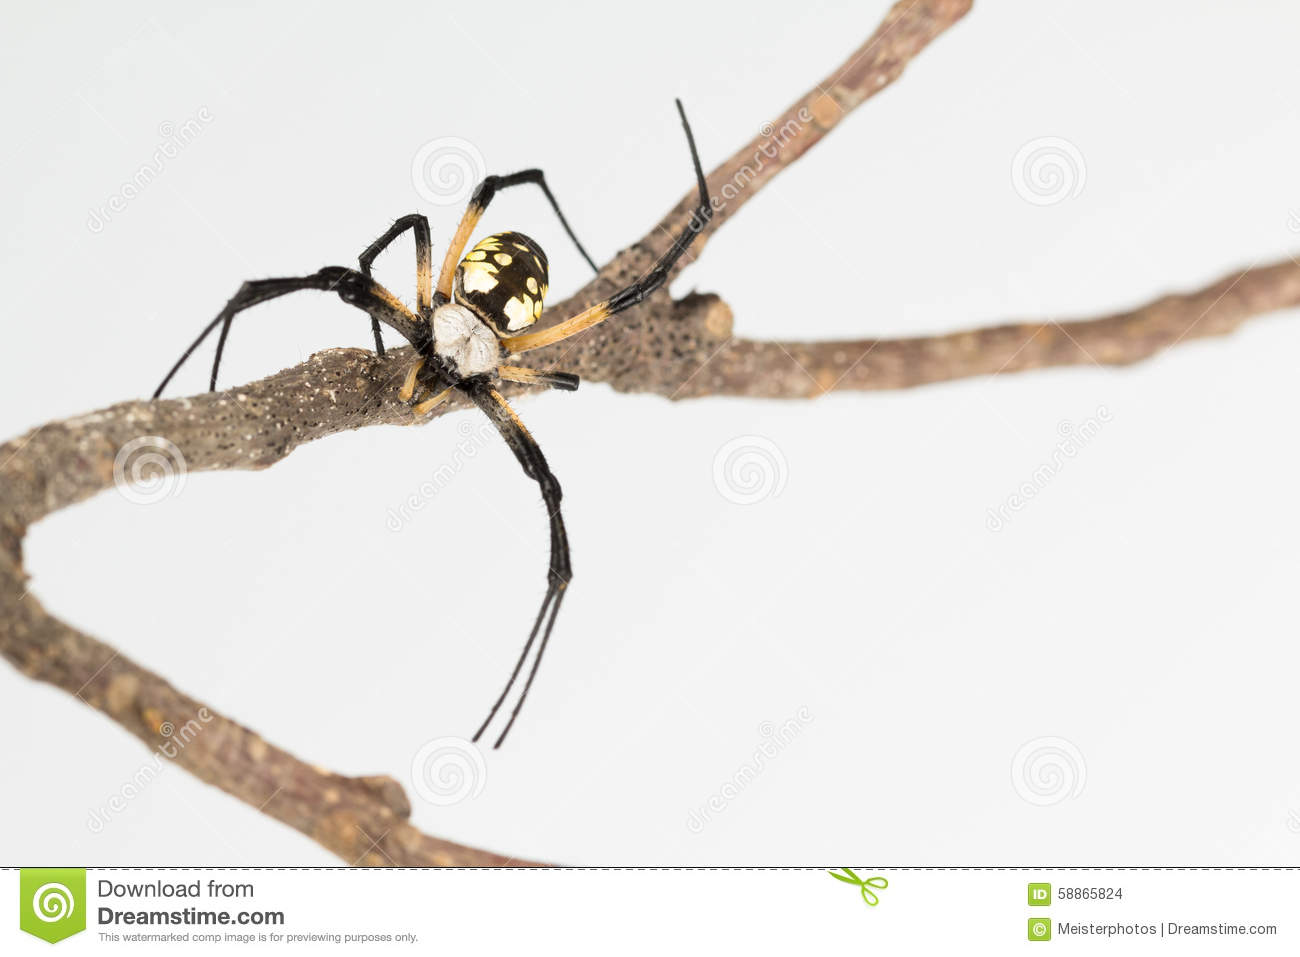 Black And Yellow Female Agriope Spider On A Twig Focused On Her Eyes